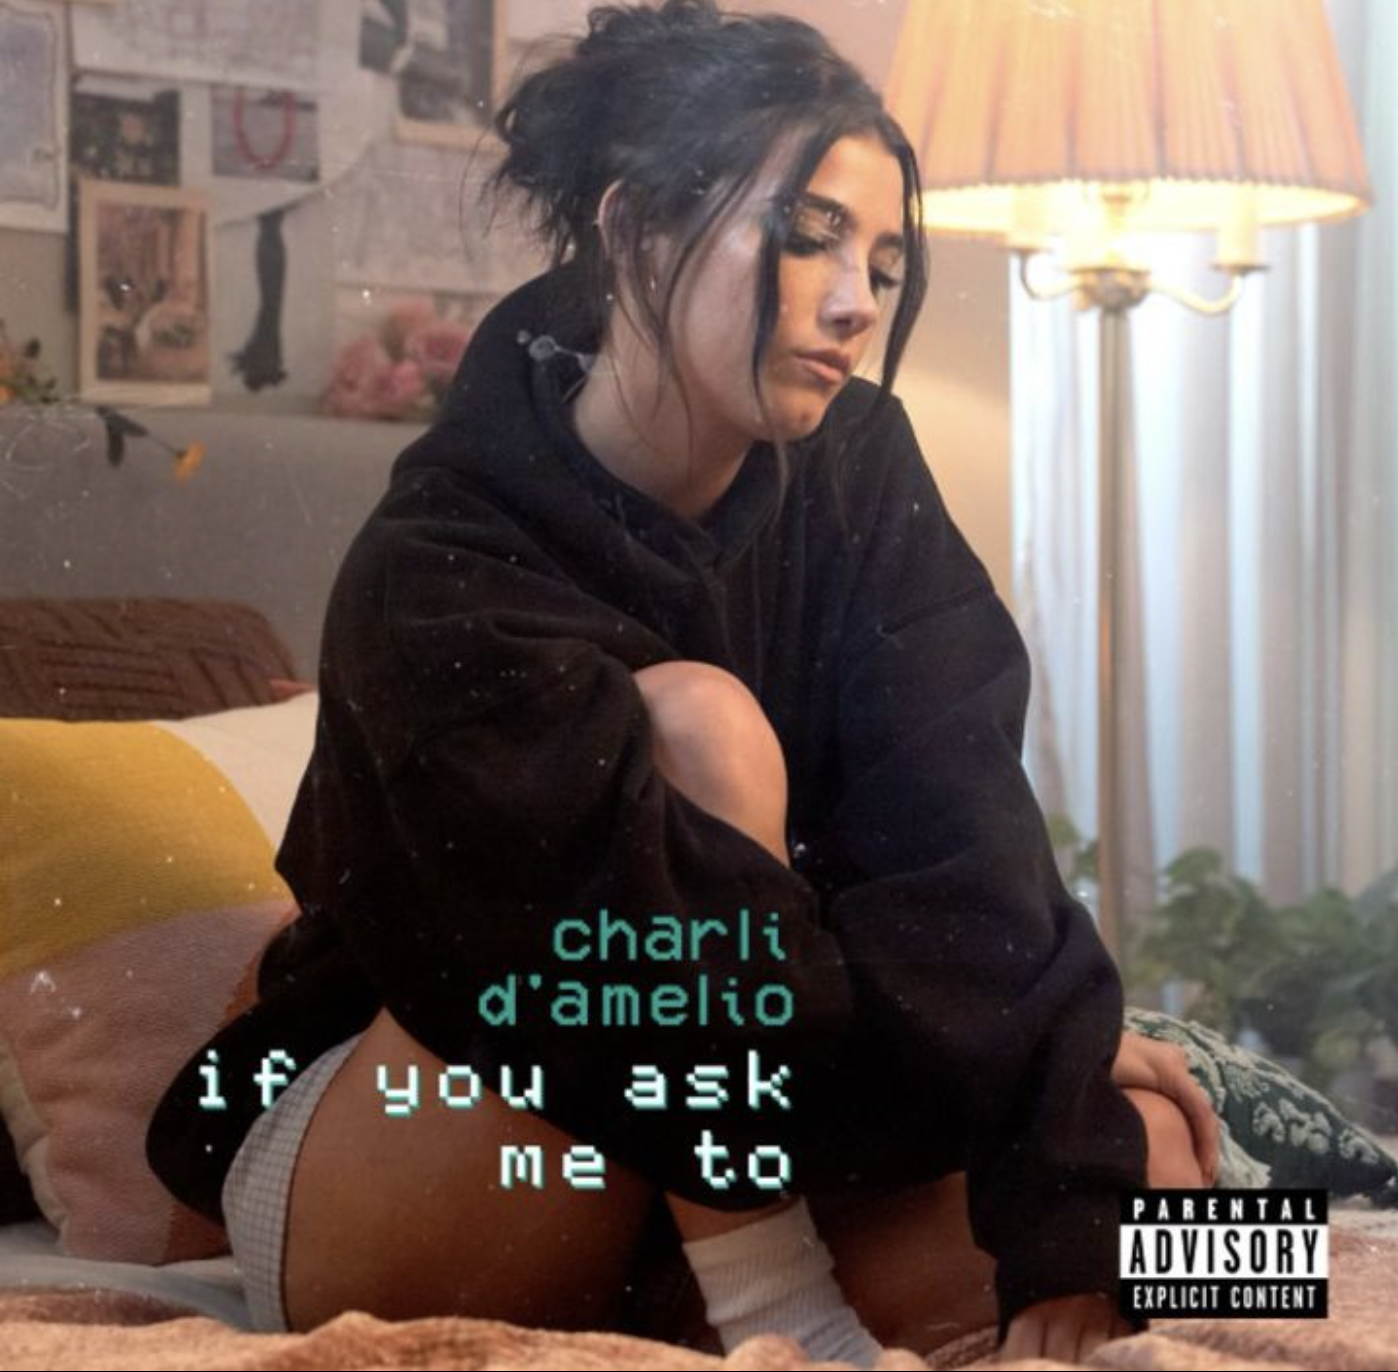 Charli D’Amelio releases her first song called “If you ask me to”!